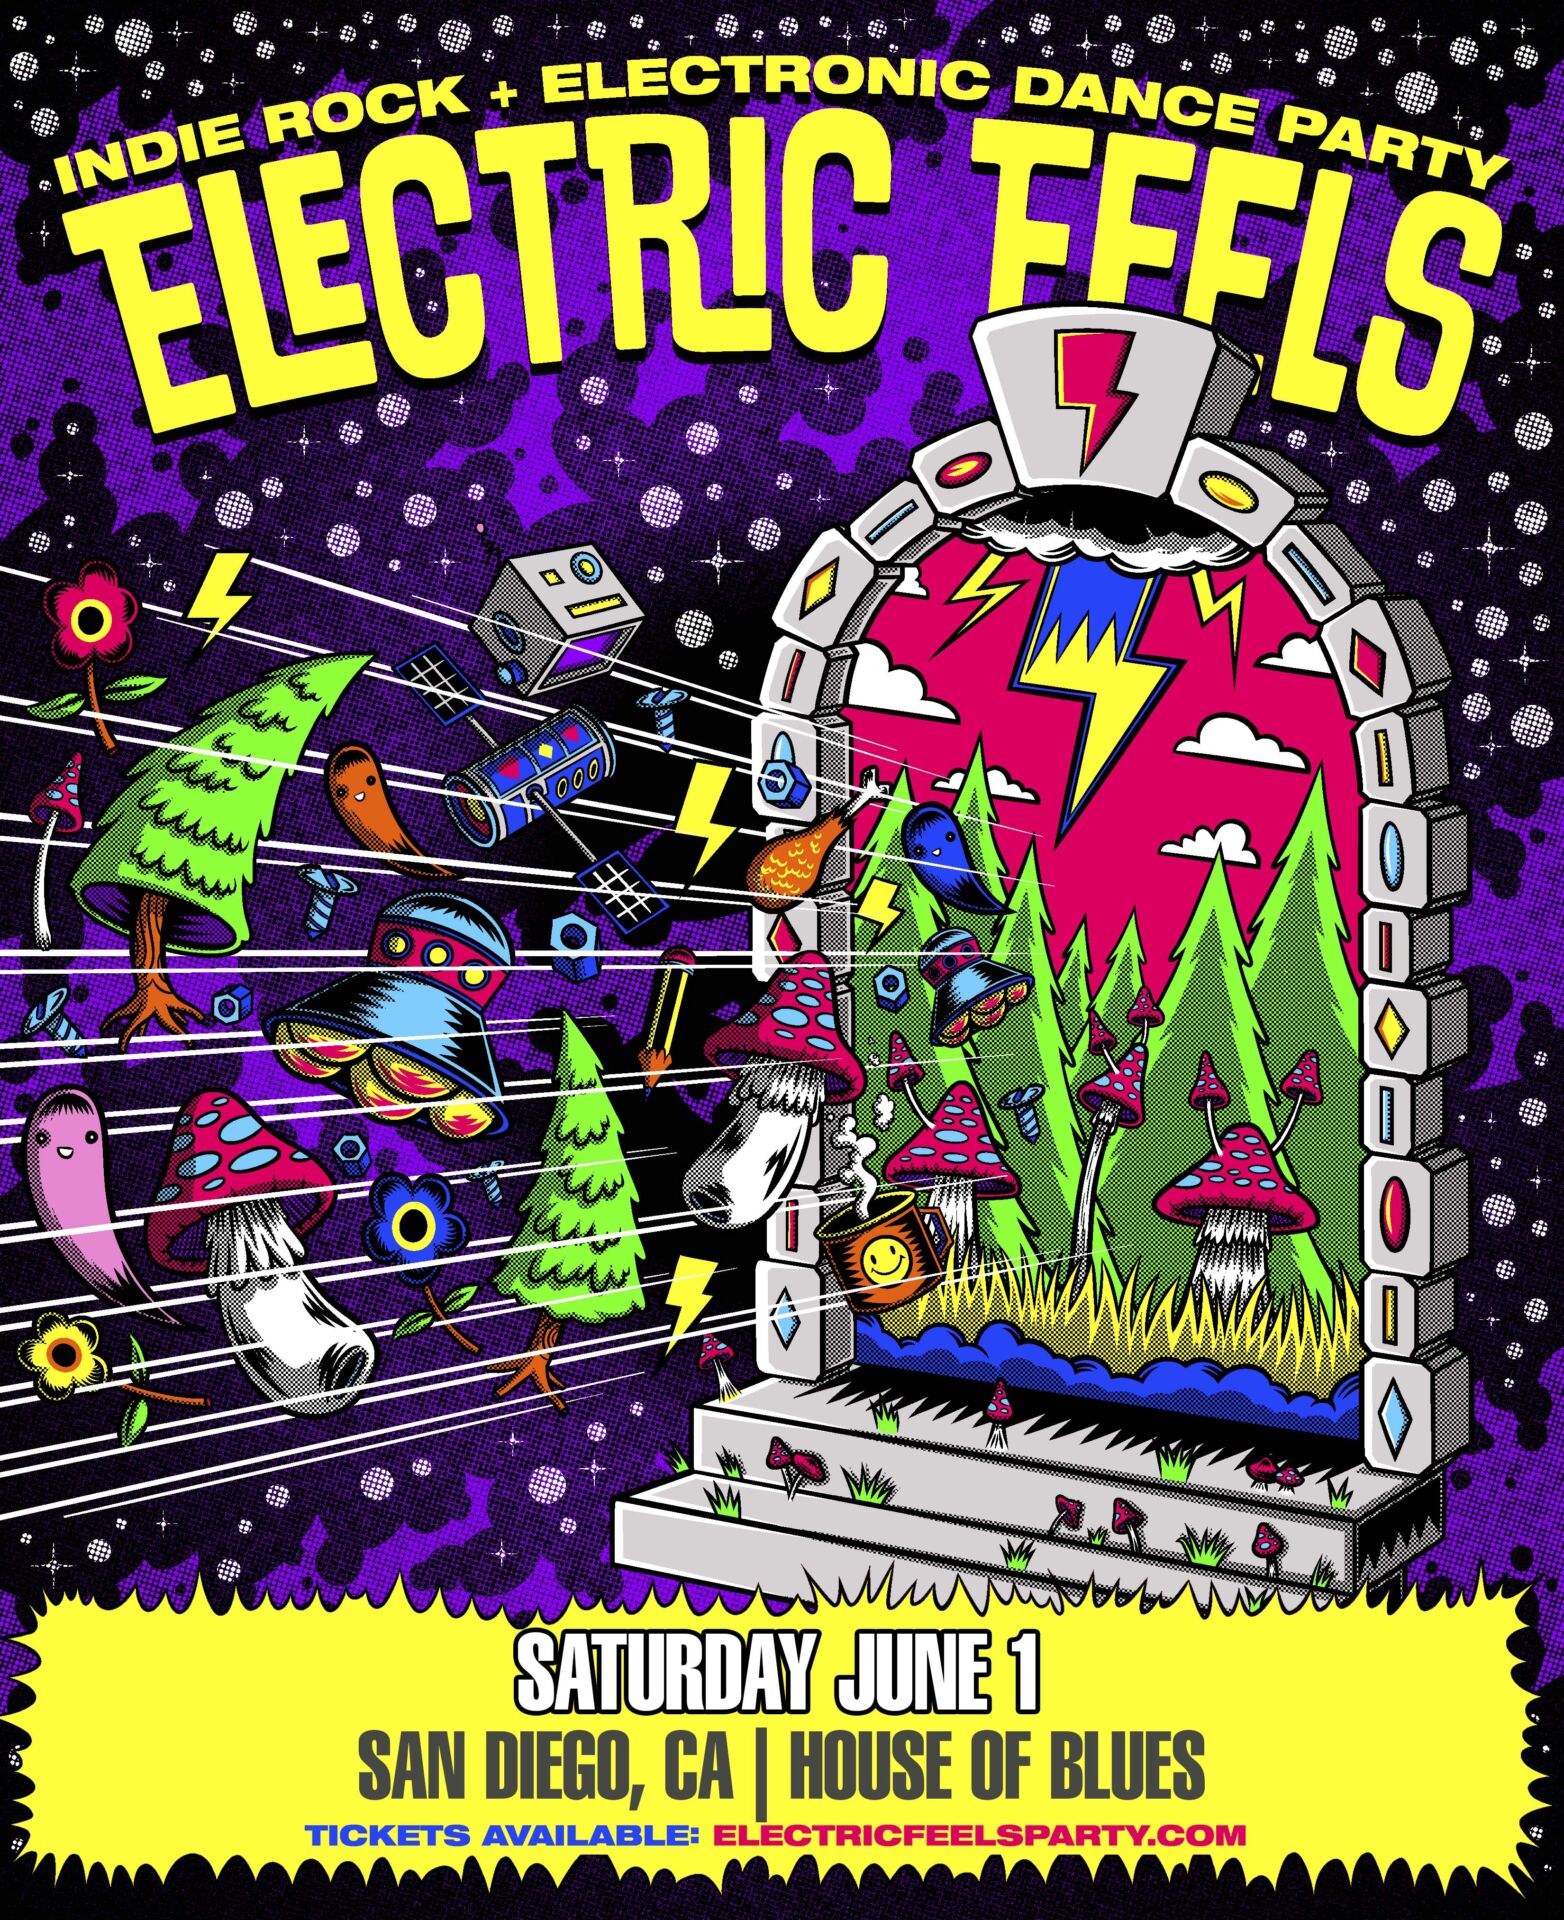 Electric Feels at House of Blues